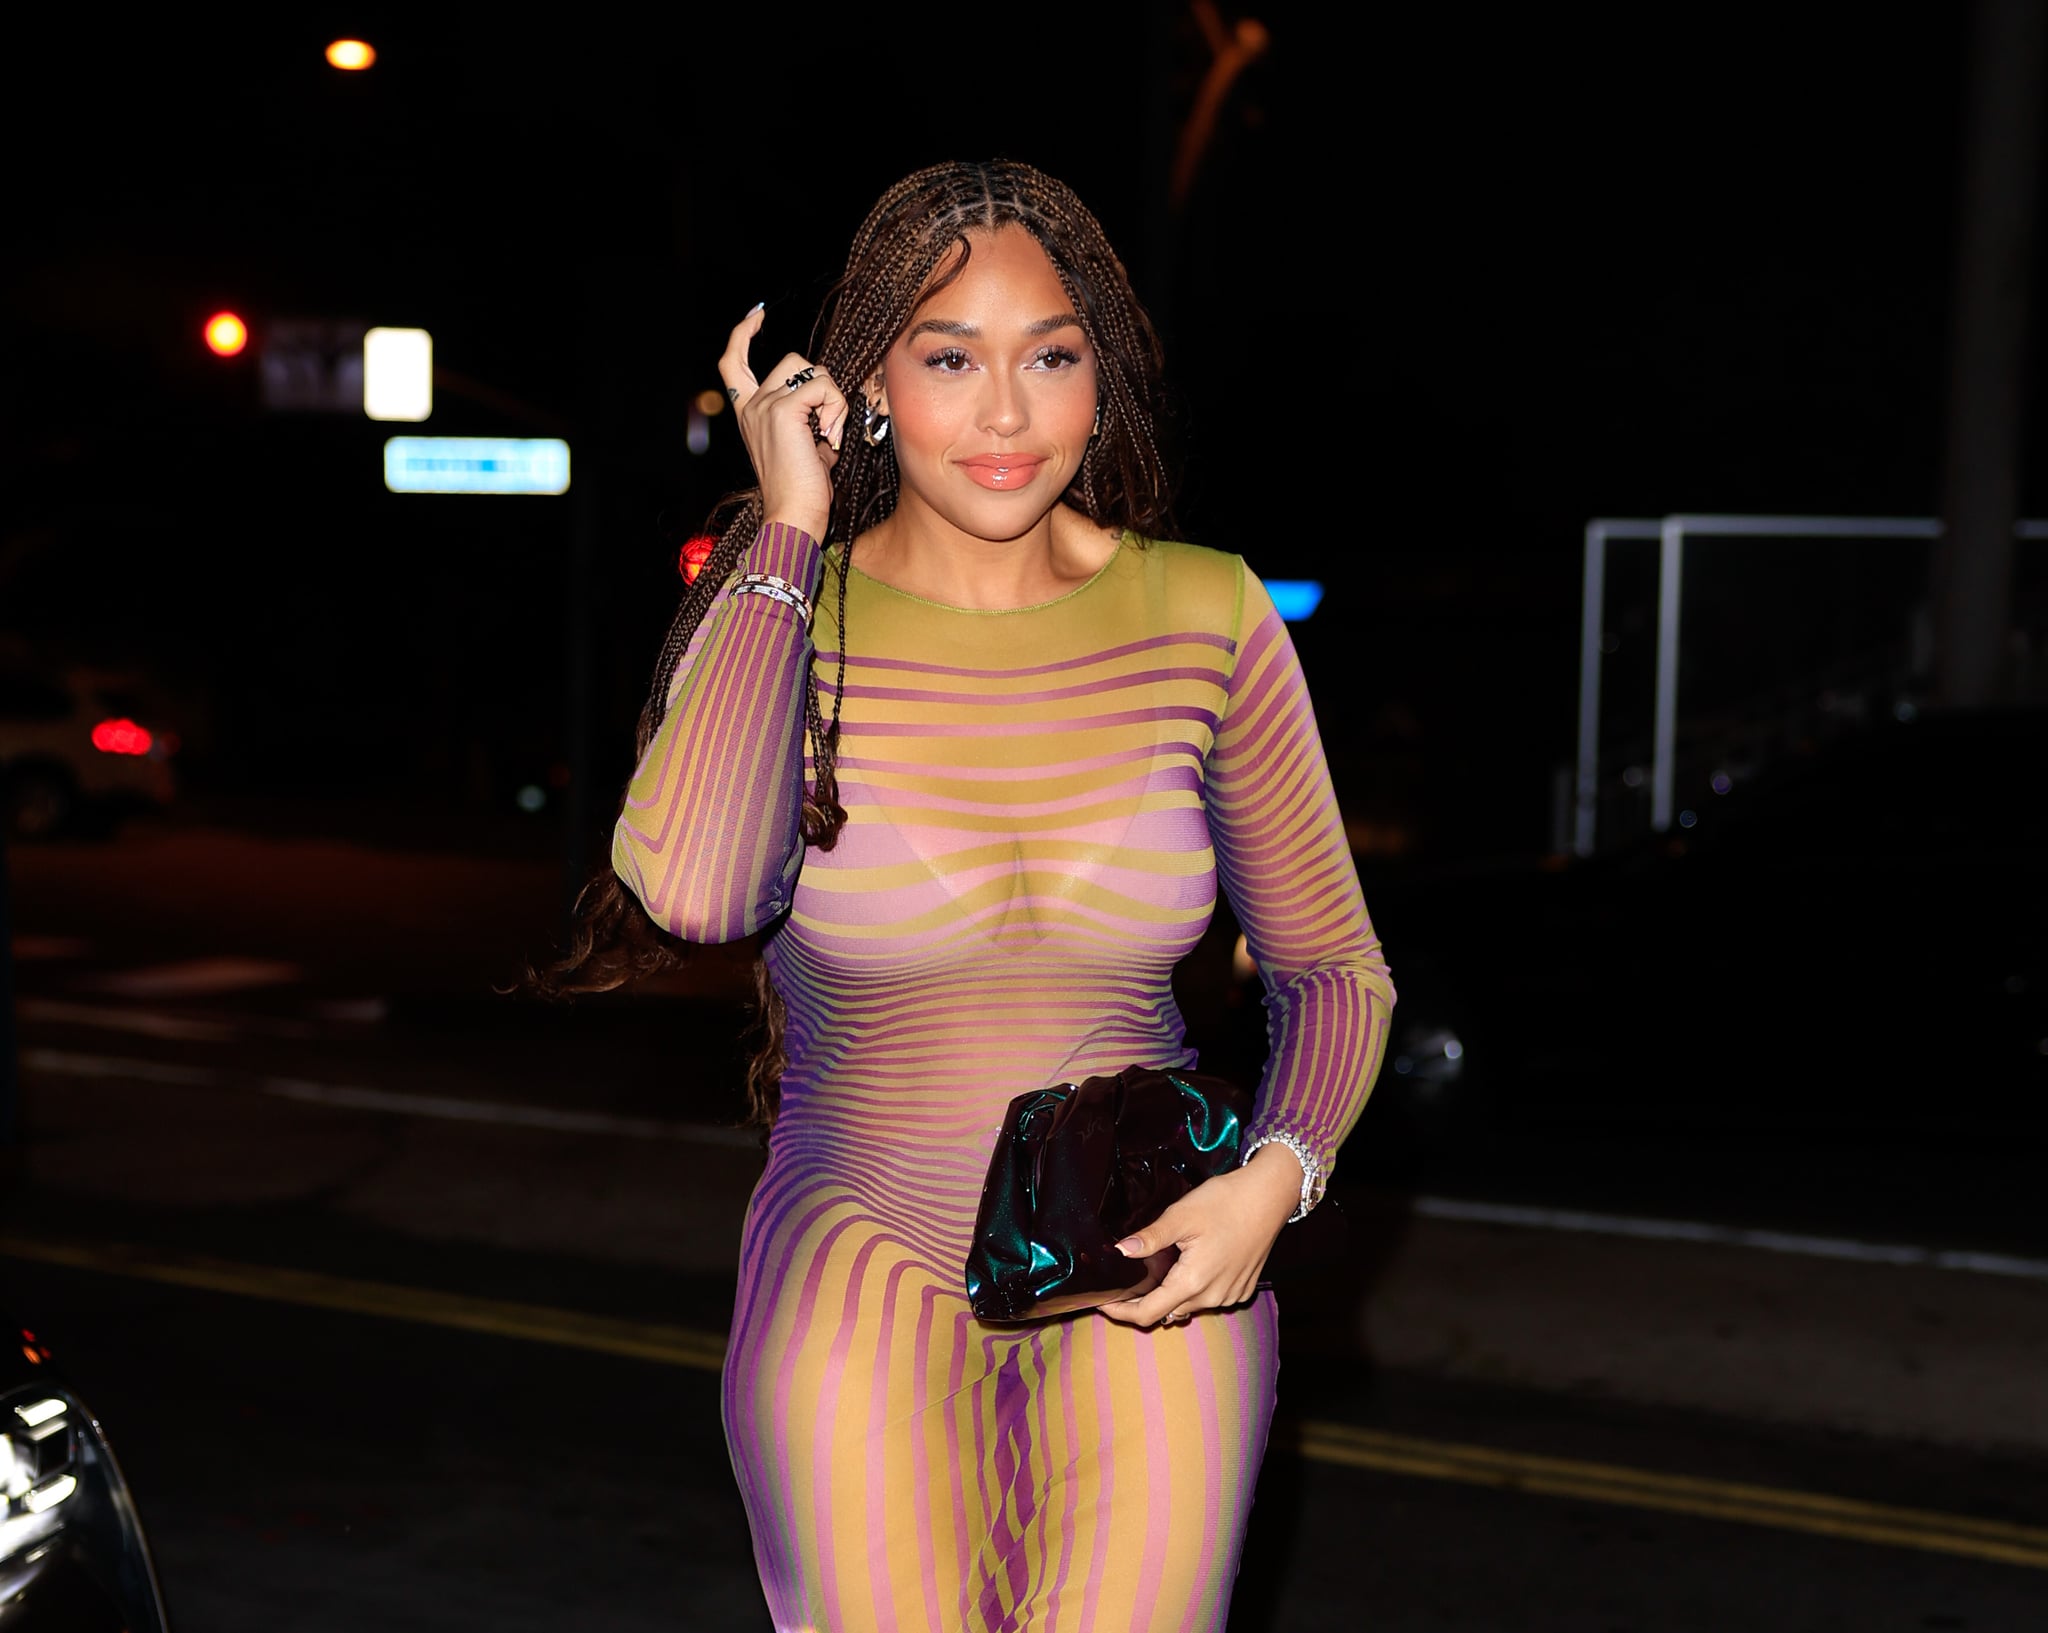 LOS ANGELES, CA - MAY 19: Jordyn Woods is seen on May 19, 2023 in Los Angeles, California.  (Photo by Rachpoot/Bauer-Griffin/GC Images)